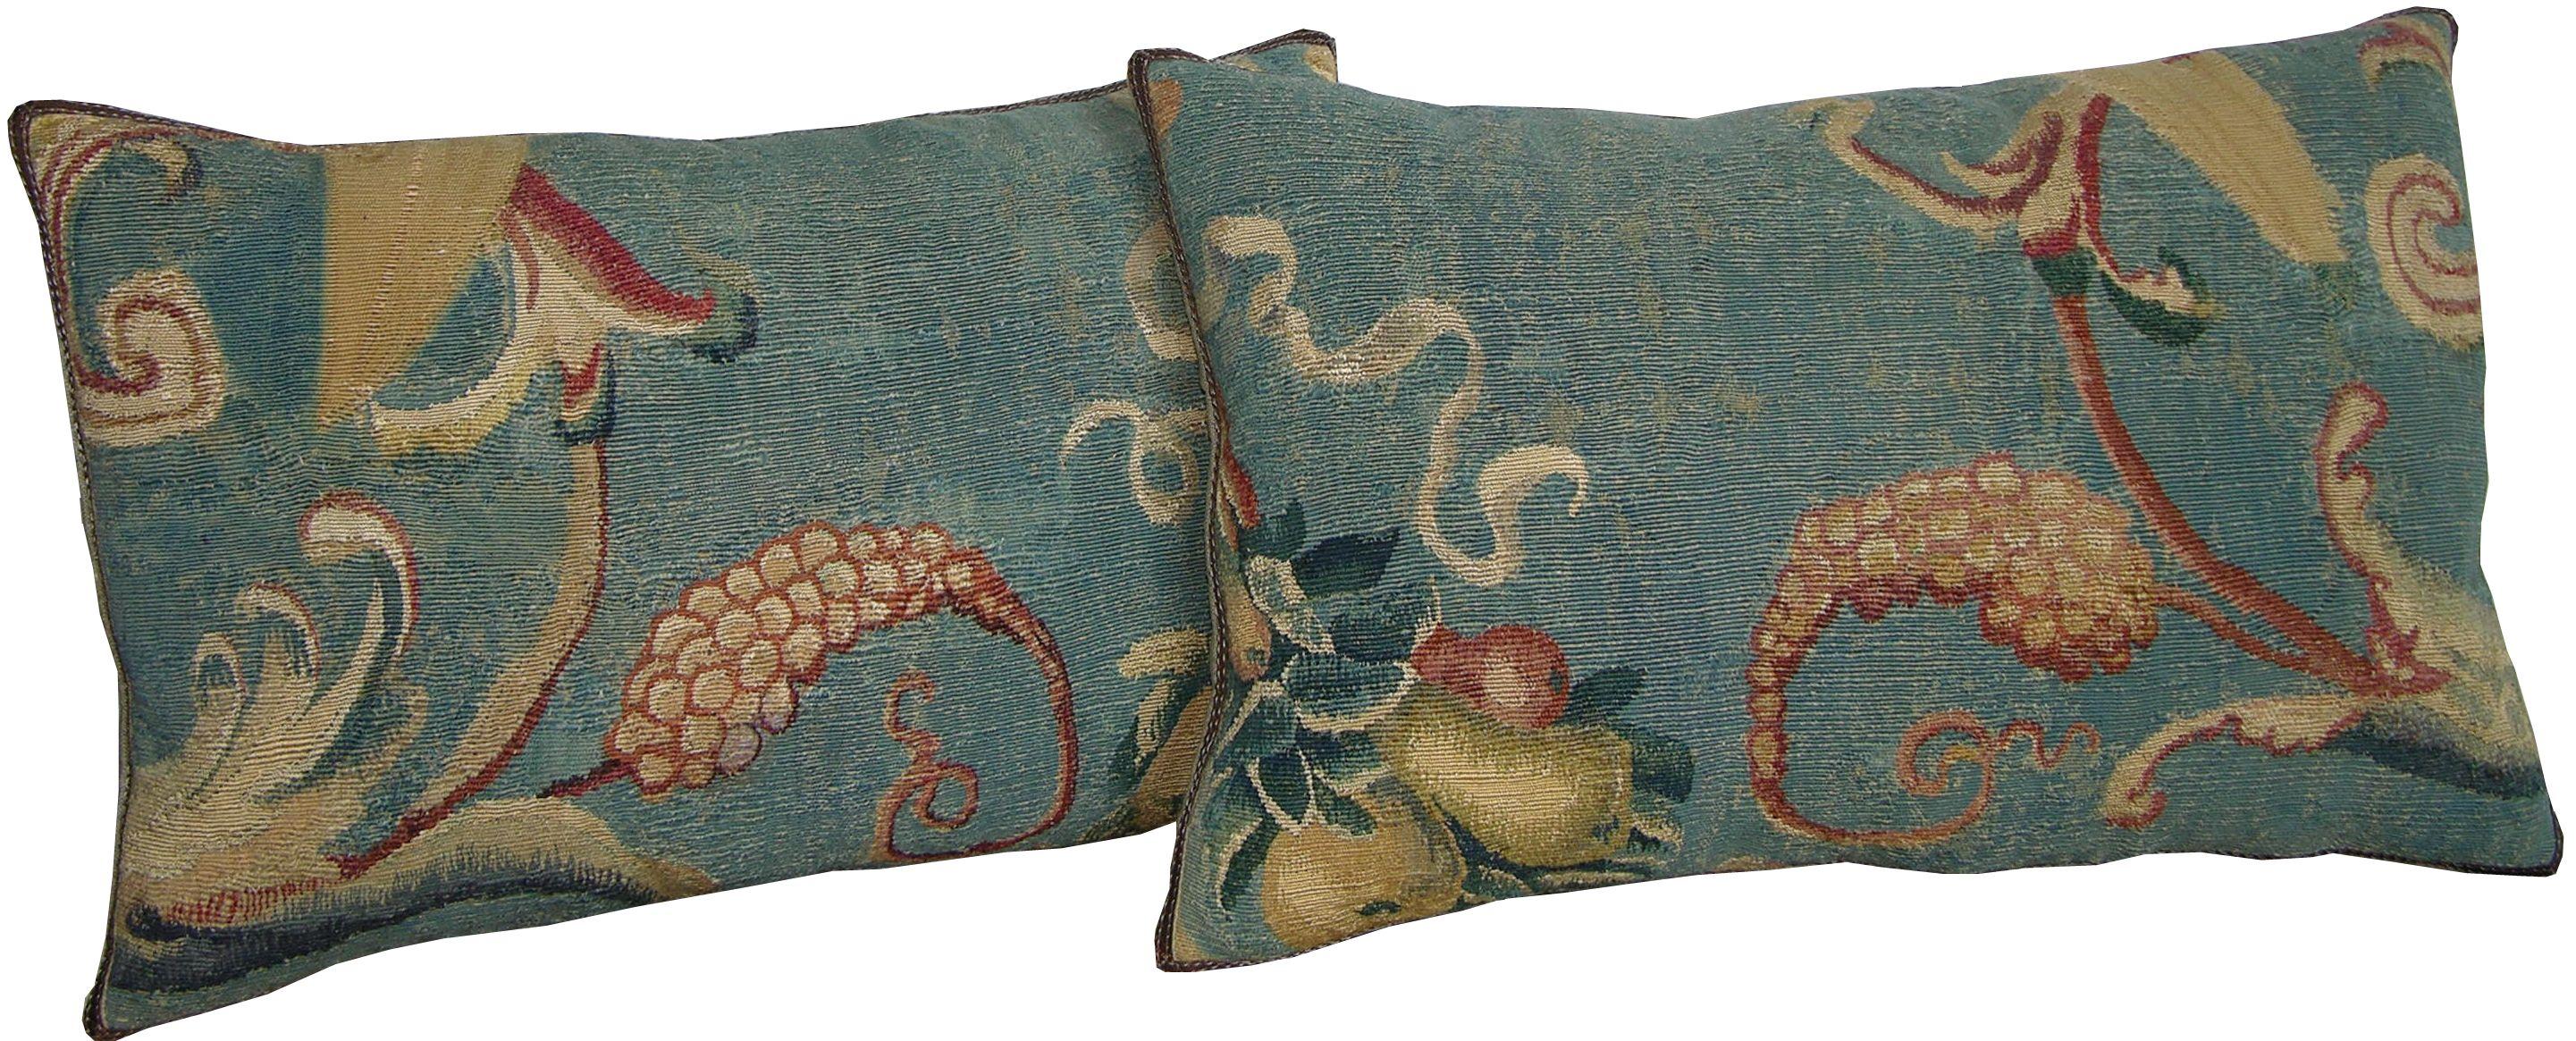 Pair of Antique French Aubusson Pillows circa 18th Century 1756p 1757p In Good Condition For Sale In Los Angeles, CA